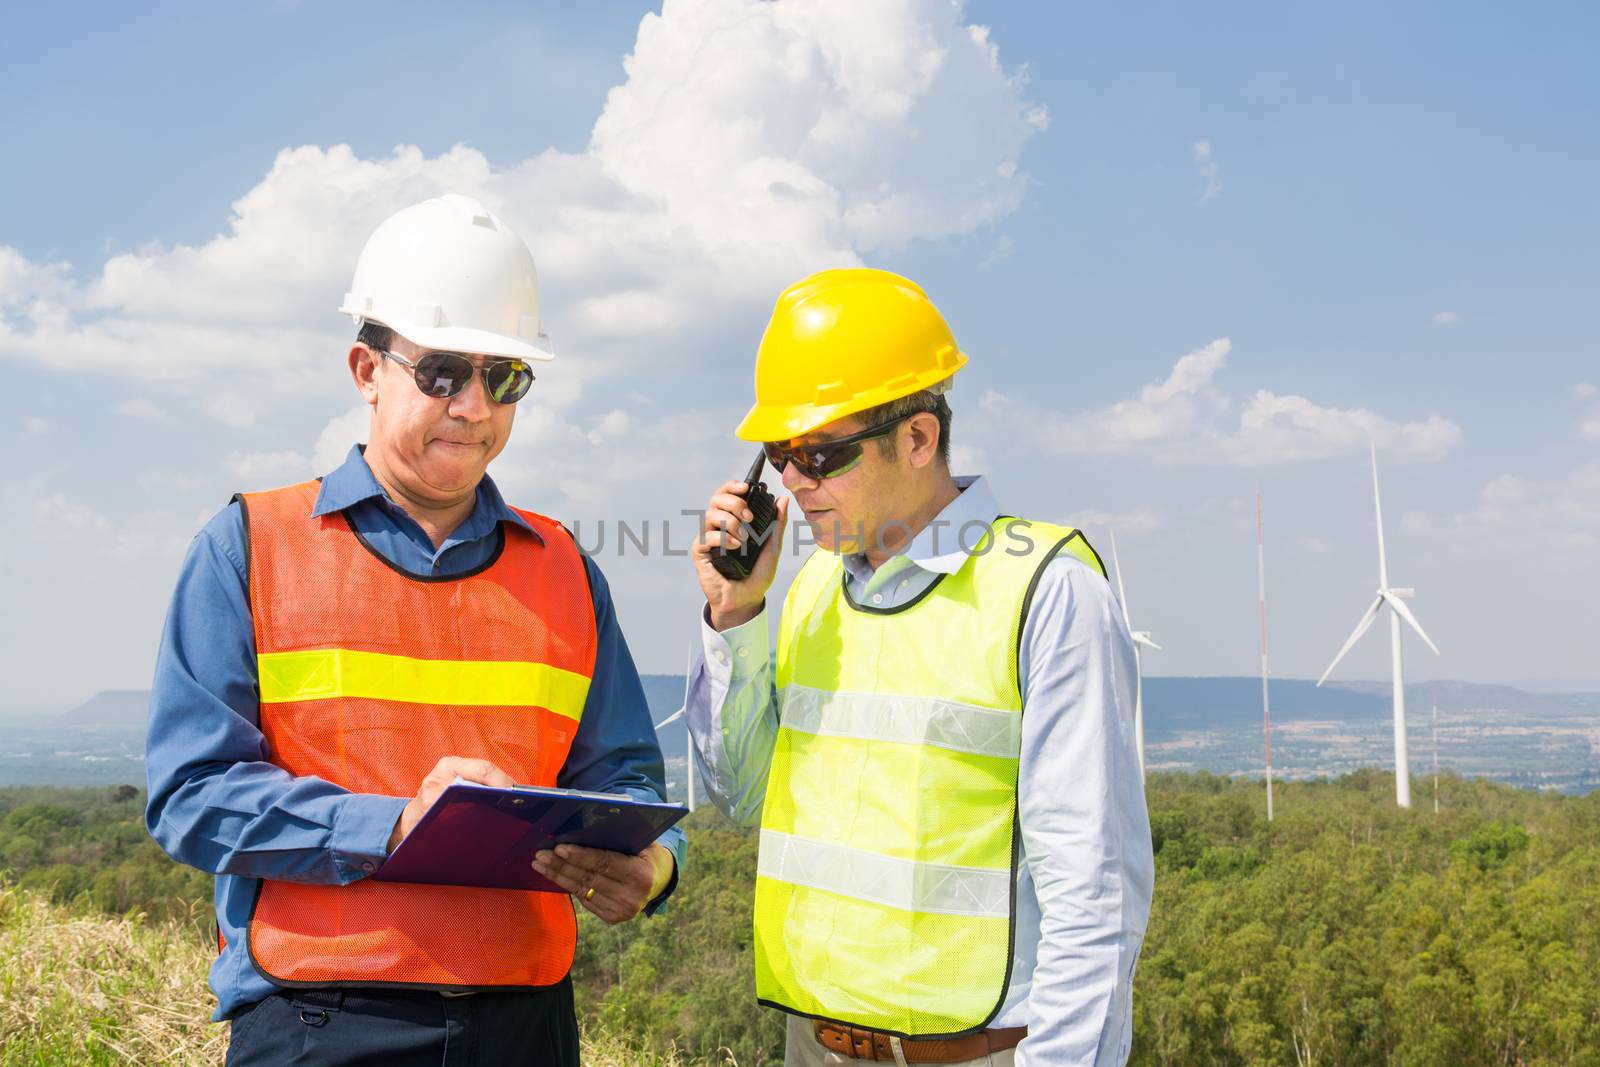 Male Engineer and Architect working Together with Hand-Held Transceiver Radio and Clipboard at Wind Turbine Power Generator Field as infrastructure construction Project Development Teamwork